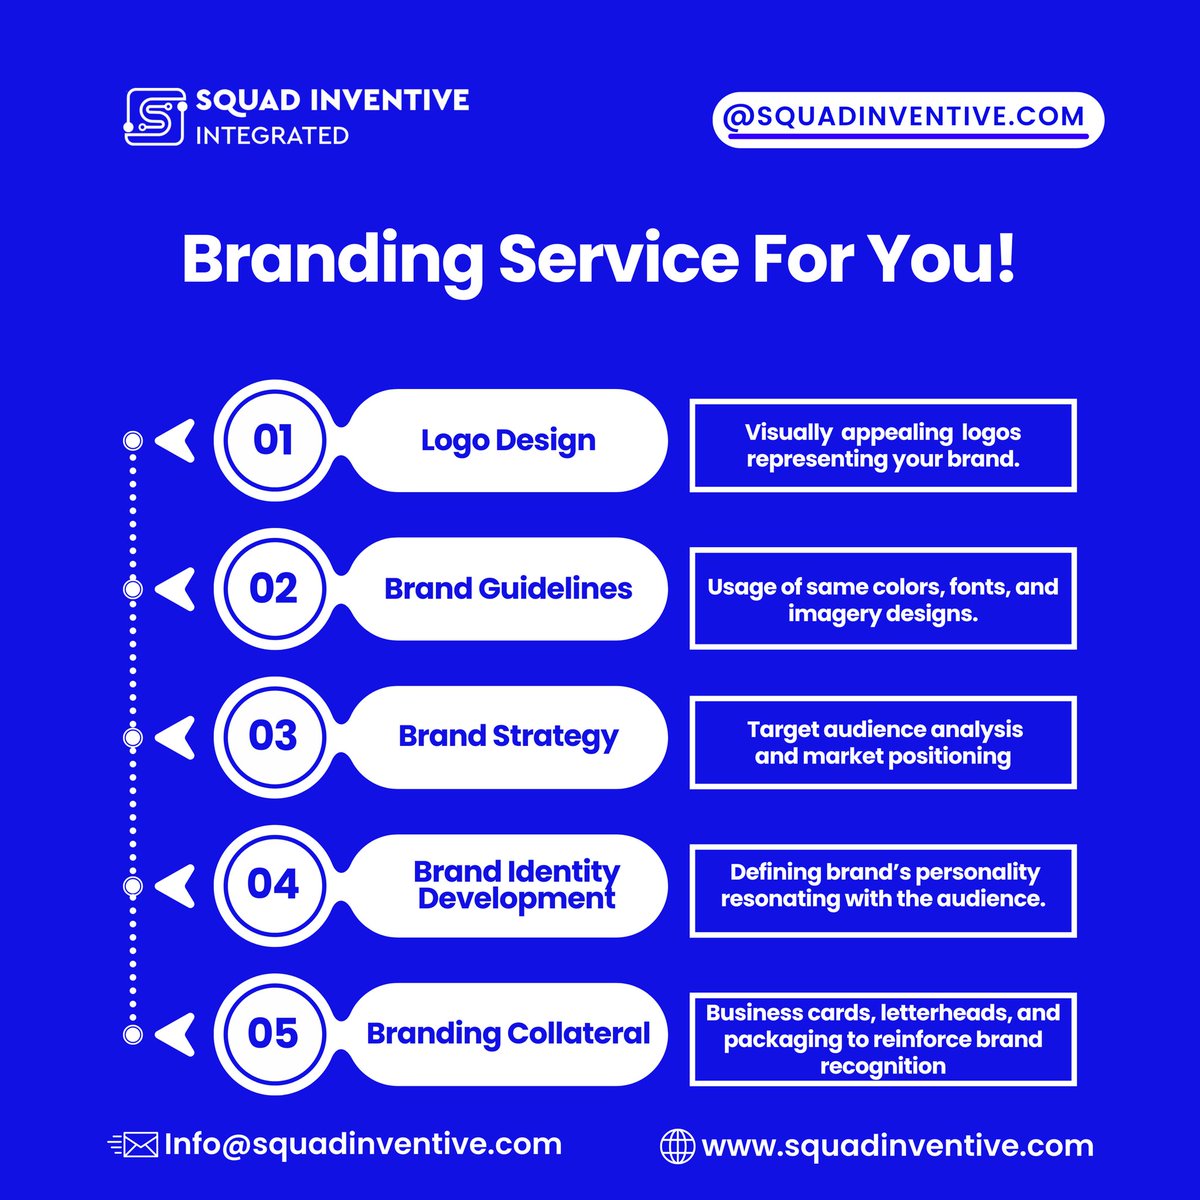 Introducing you to our branding service 😊 we transform visions and ideas into professional brand identities

Contact us @squadinventive or email info@squadinventive.com

#branding #brandidentity #brandidentitydesign #LovelyRunner #CSKvsLSG #practicenurse #medicaldoctor #logo